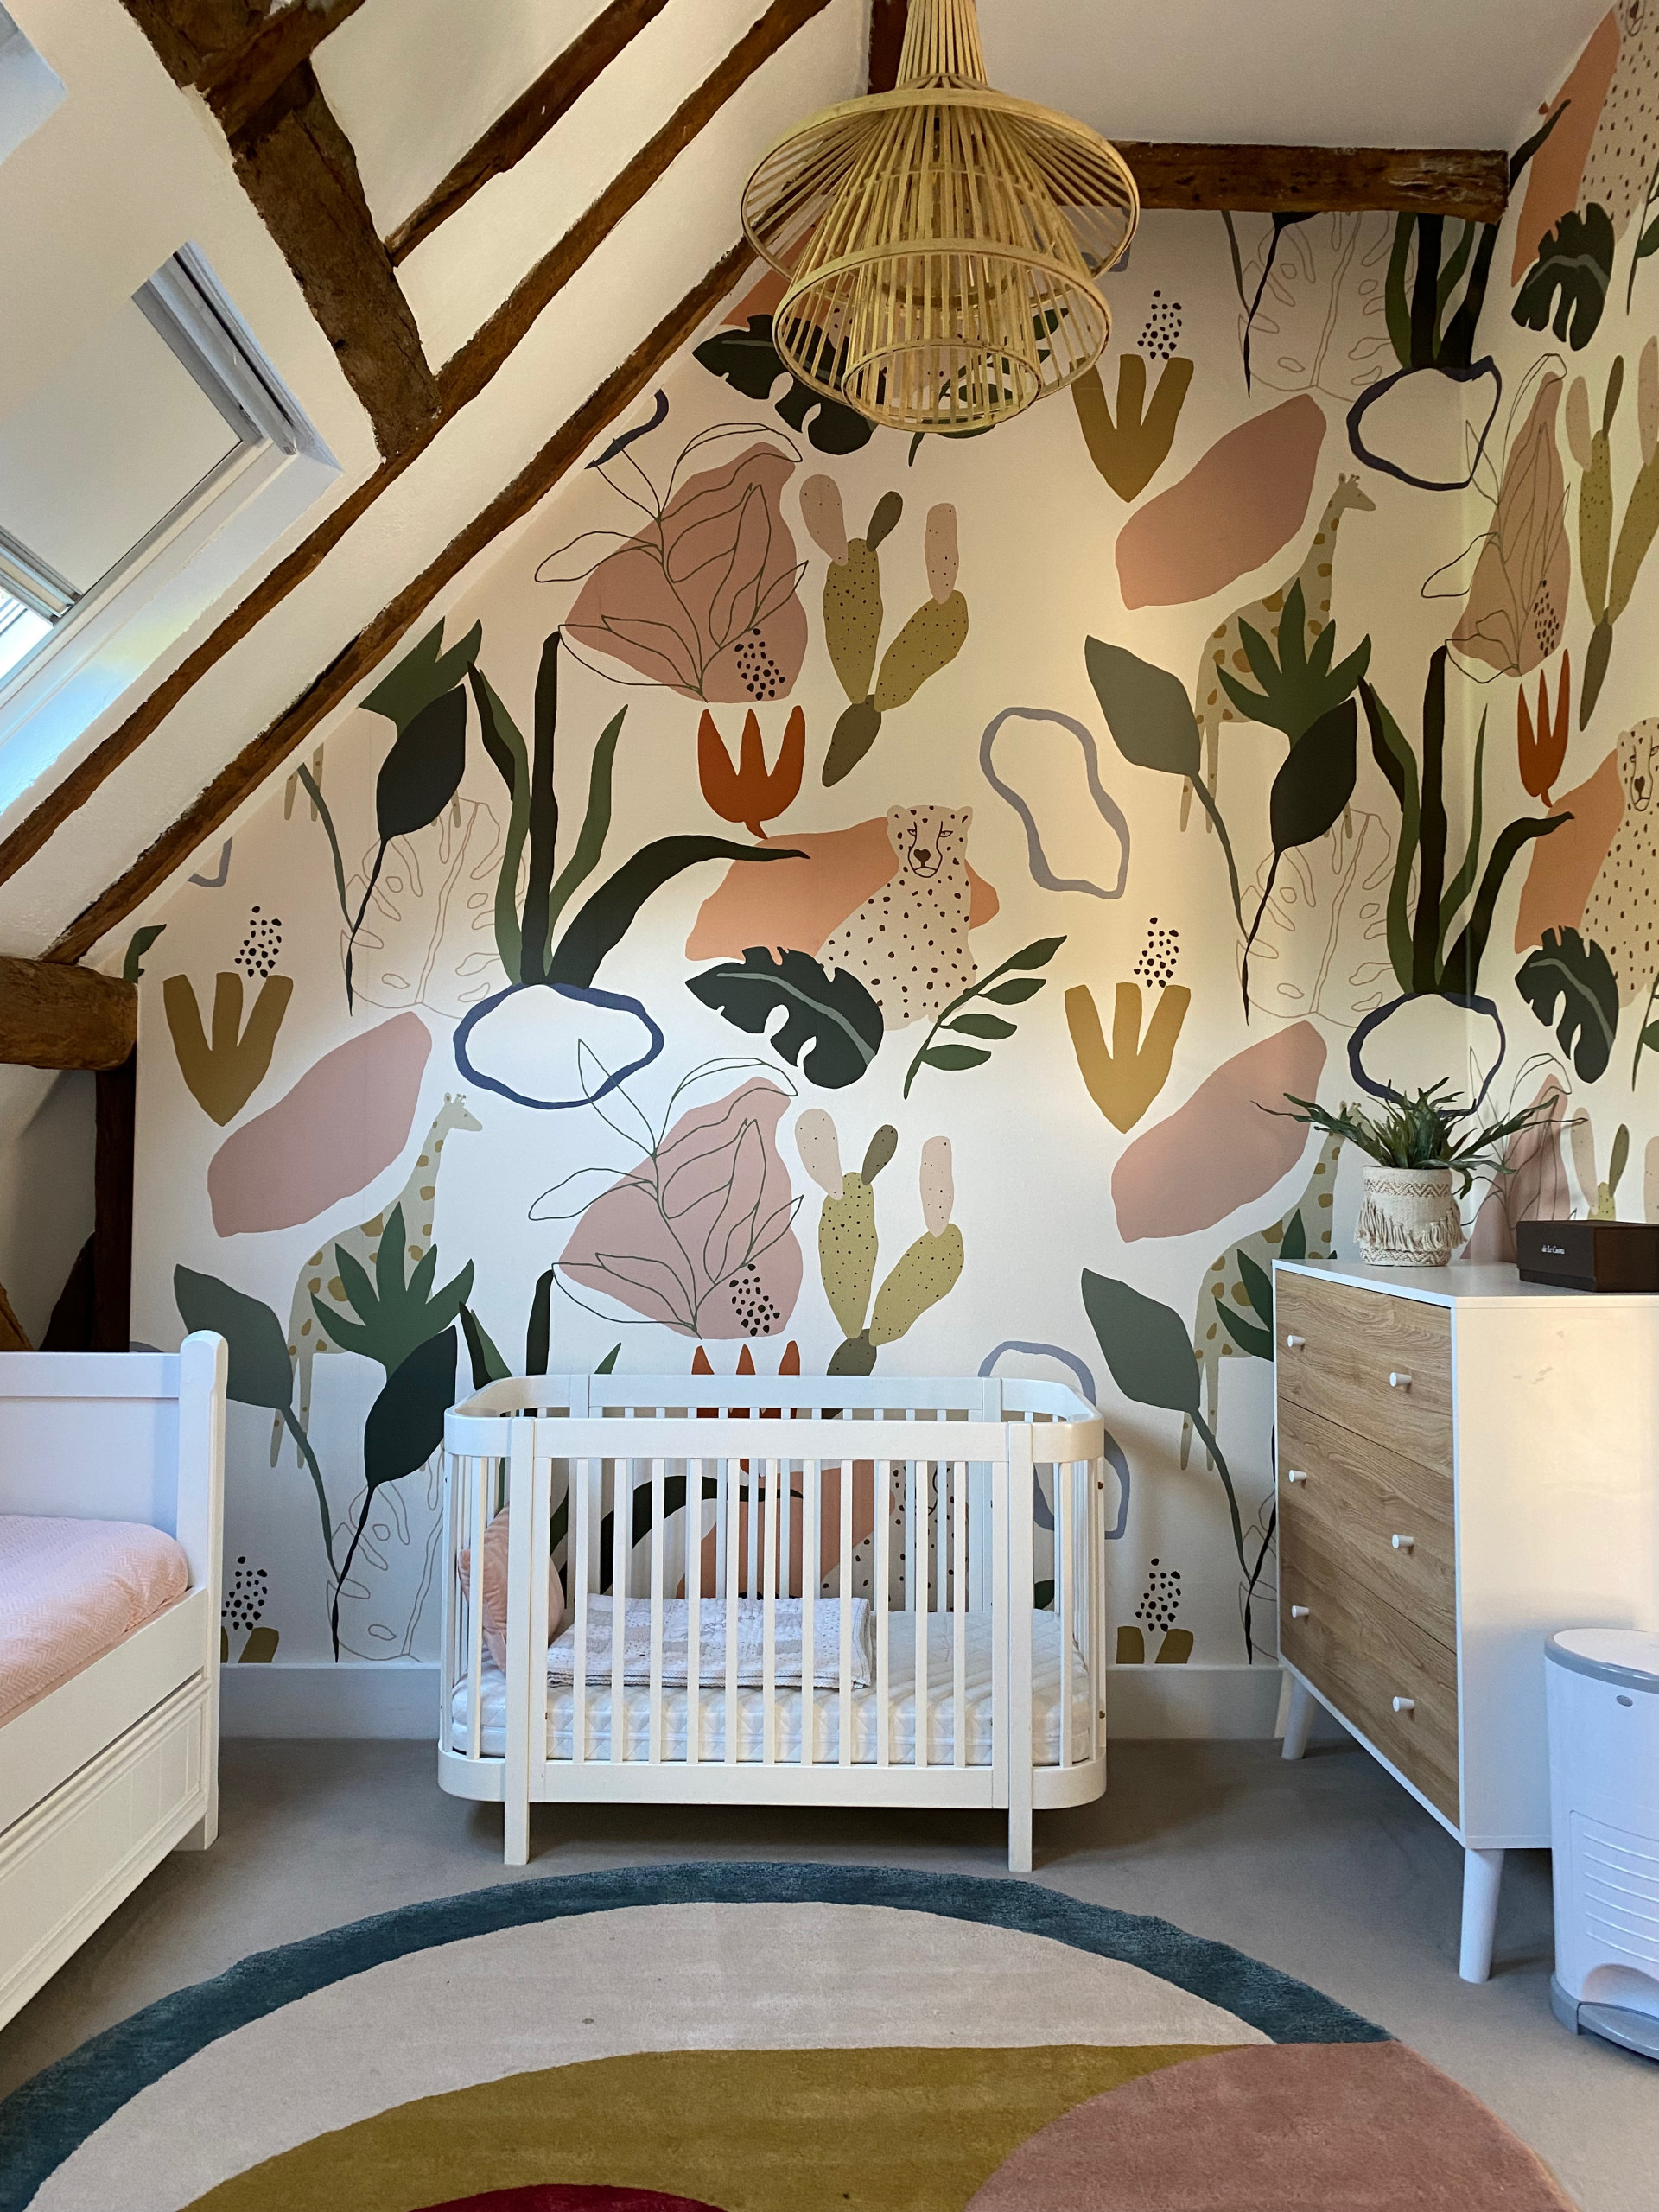 Inspiration for a modern nursery remodel in Kent